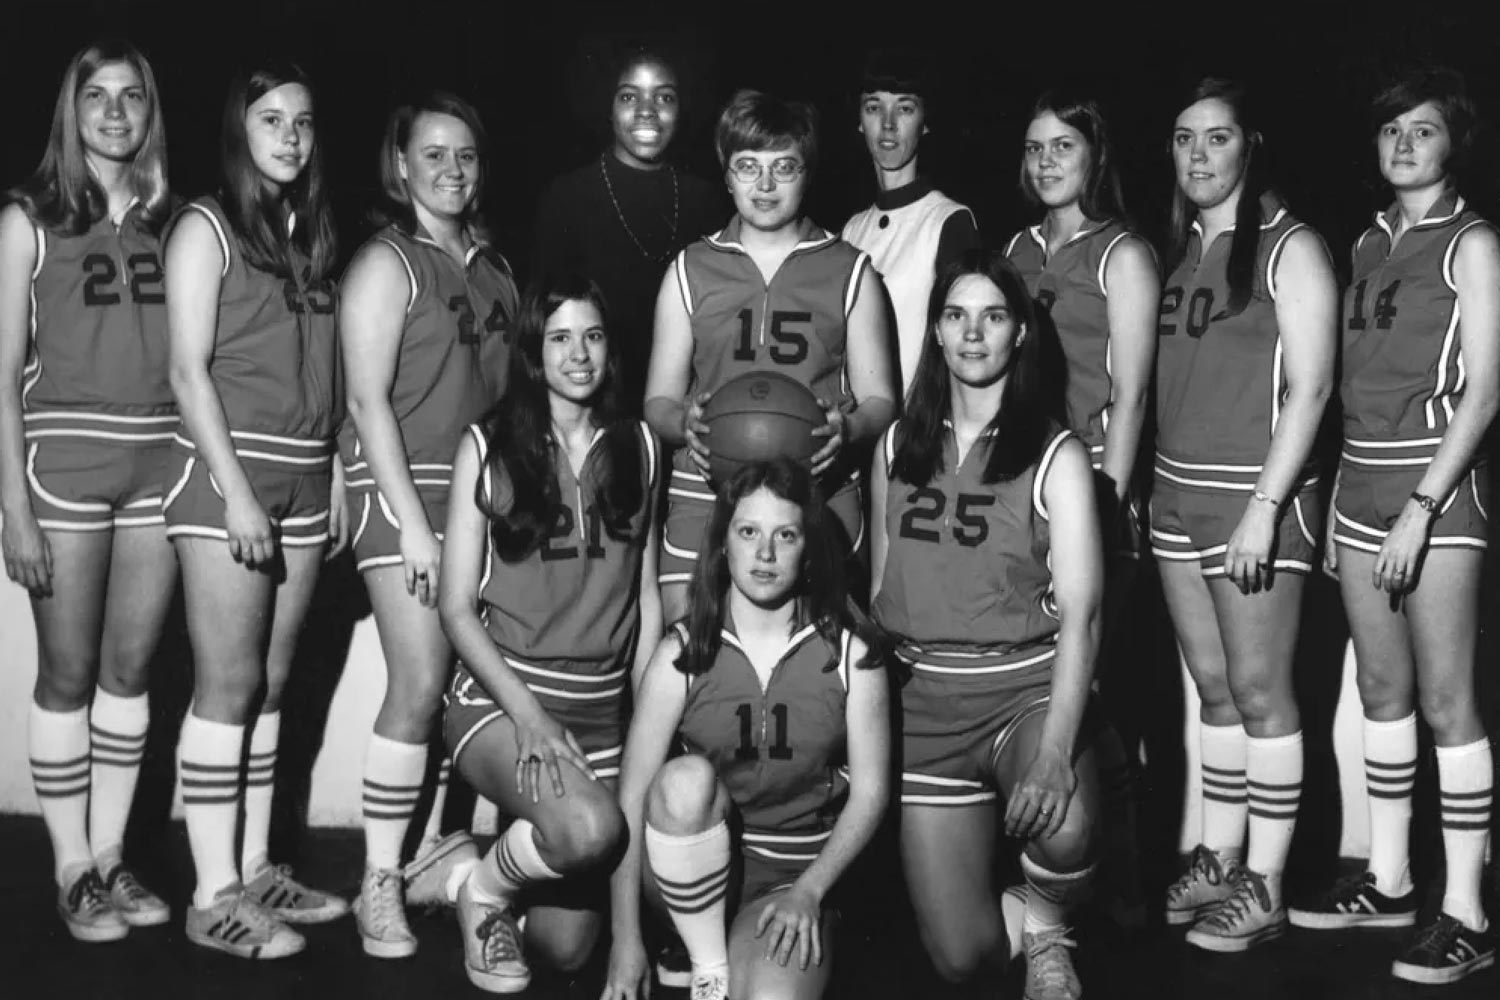 Black and white photo of a women's basketball team